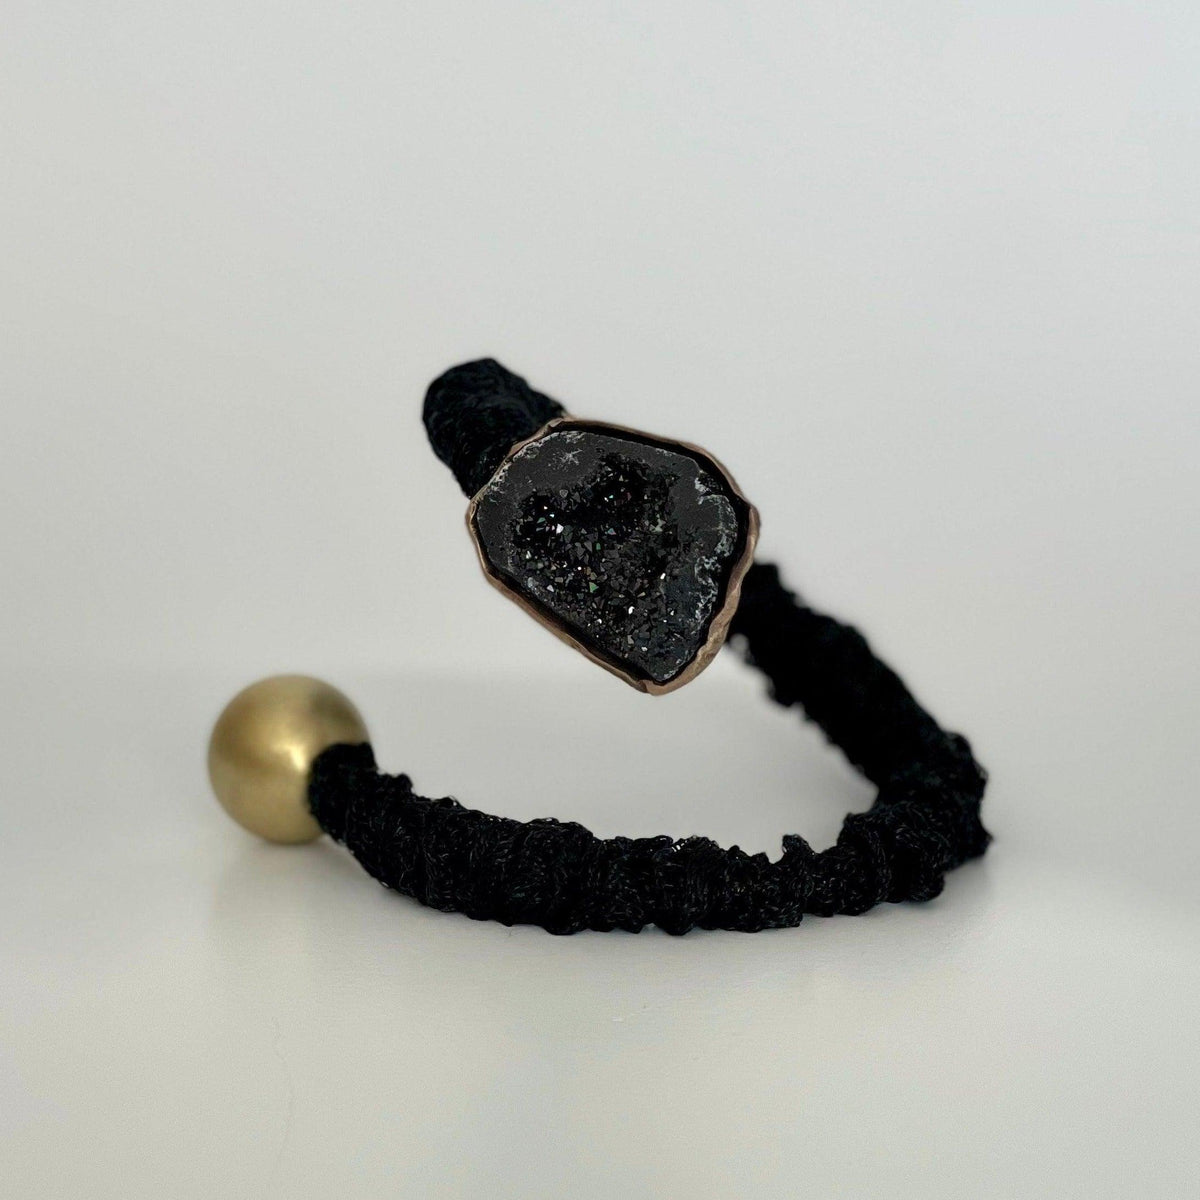 Adjustable Cuff Bracelet with Black Agate Stone -Cosmo